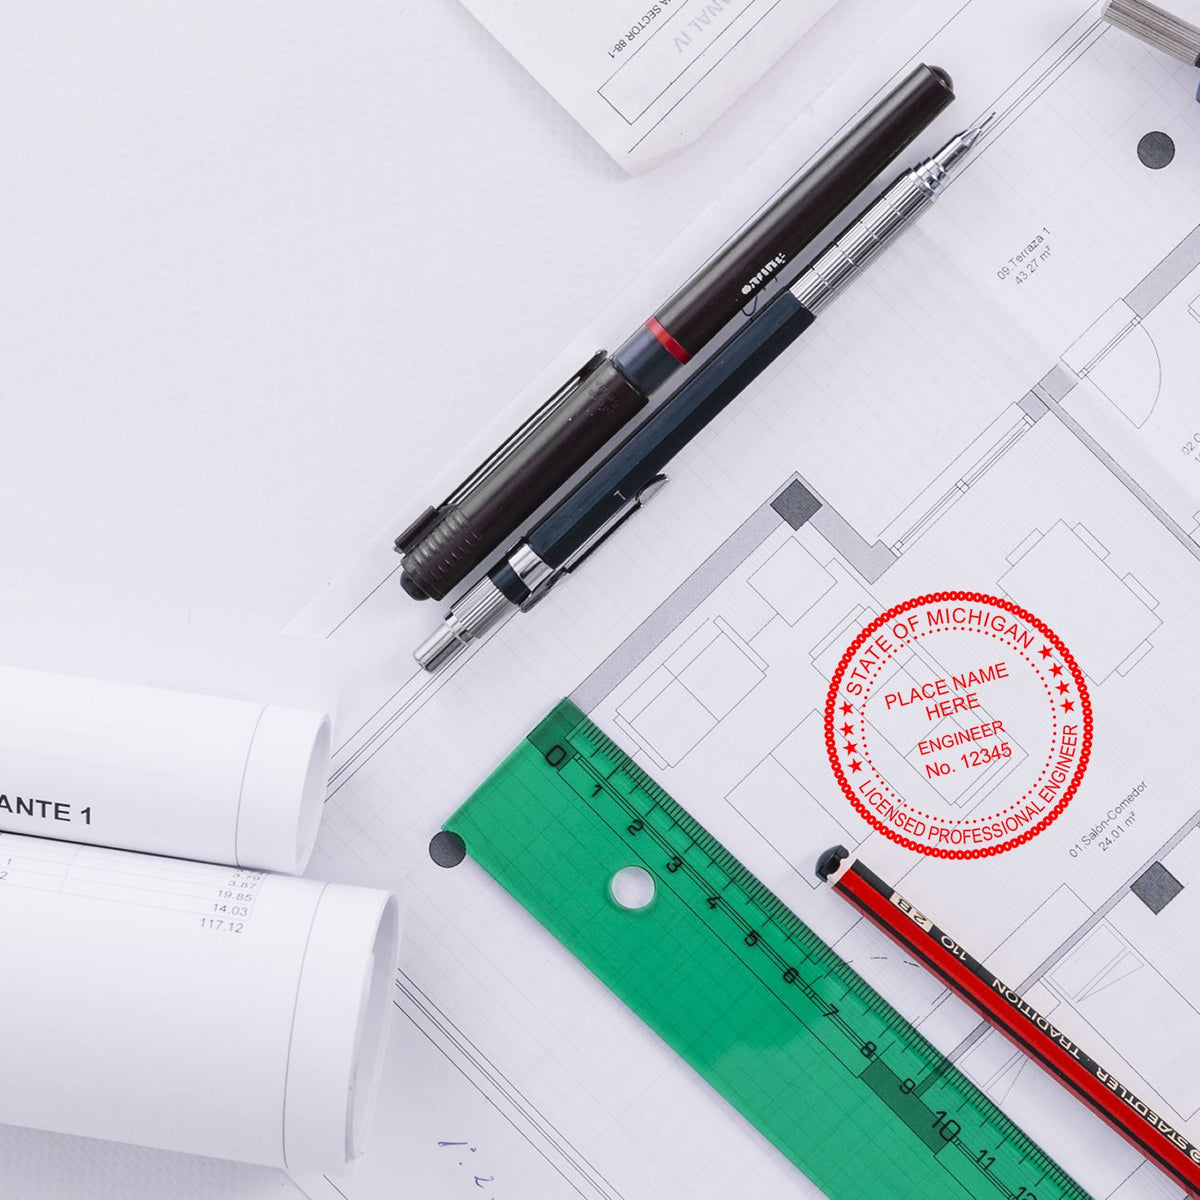 The Premium MaxLight Pre-Inked Michigan Engineering Stamp stamp impression comes to life with a crisp, detailed photo on paper - showcasing true professional quality.